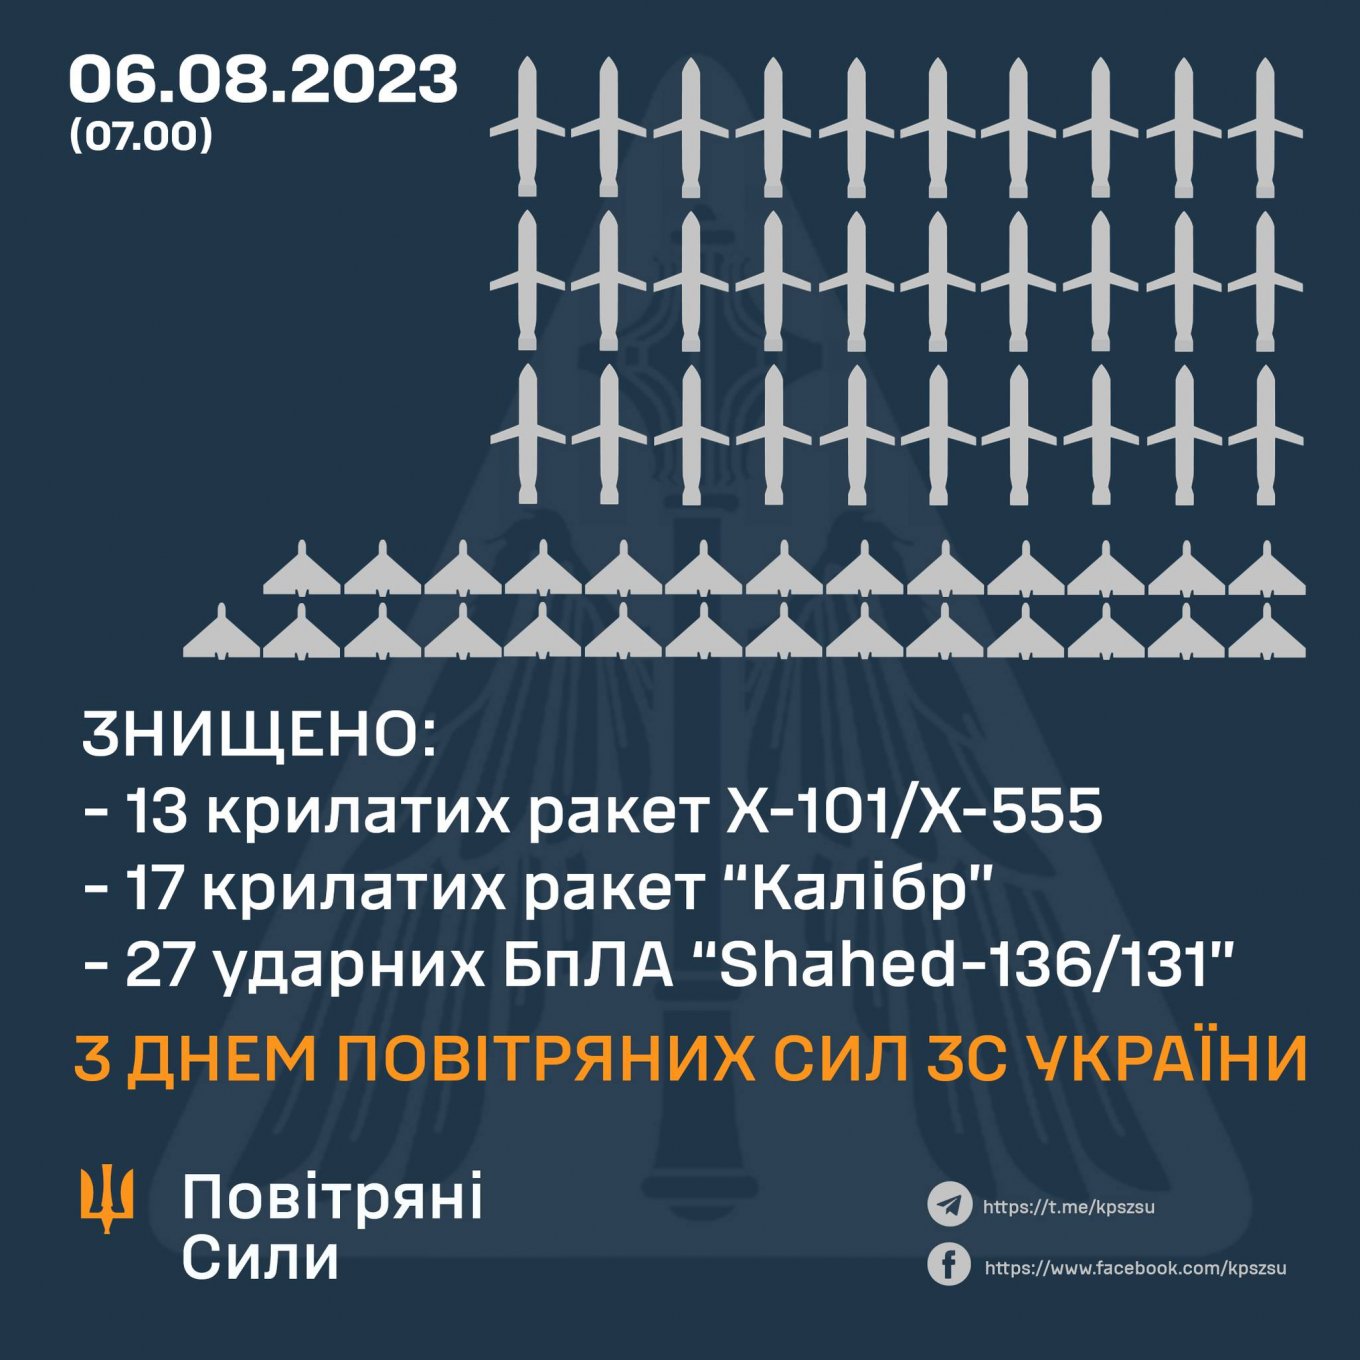 the number of air threats eliminated by Ukrainian air defense on in this combined missile attack as of August 6th morning